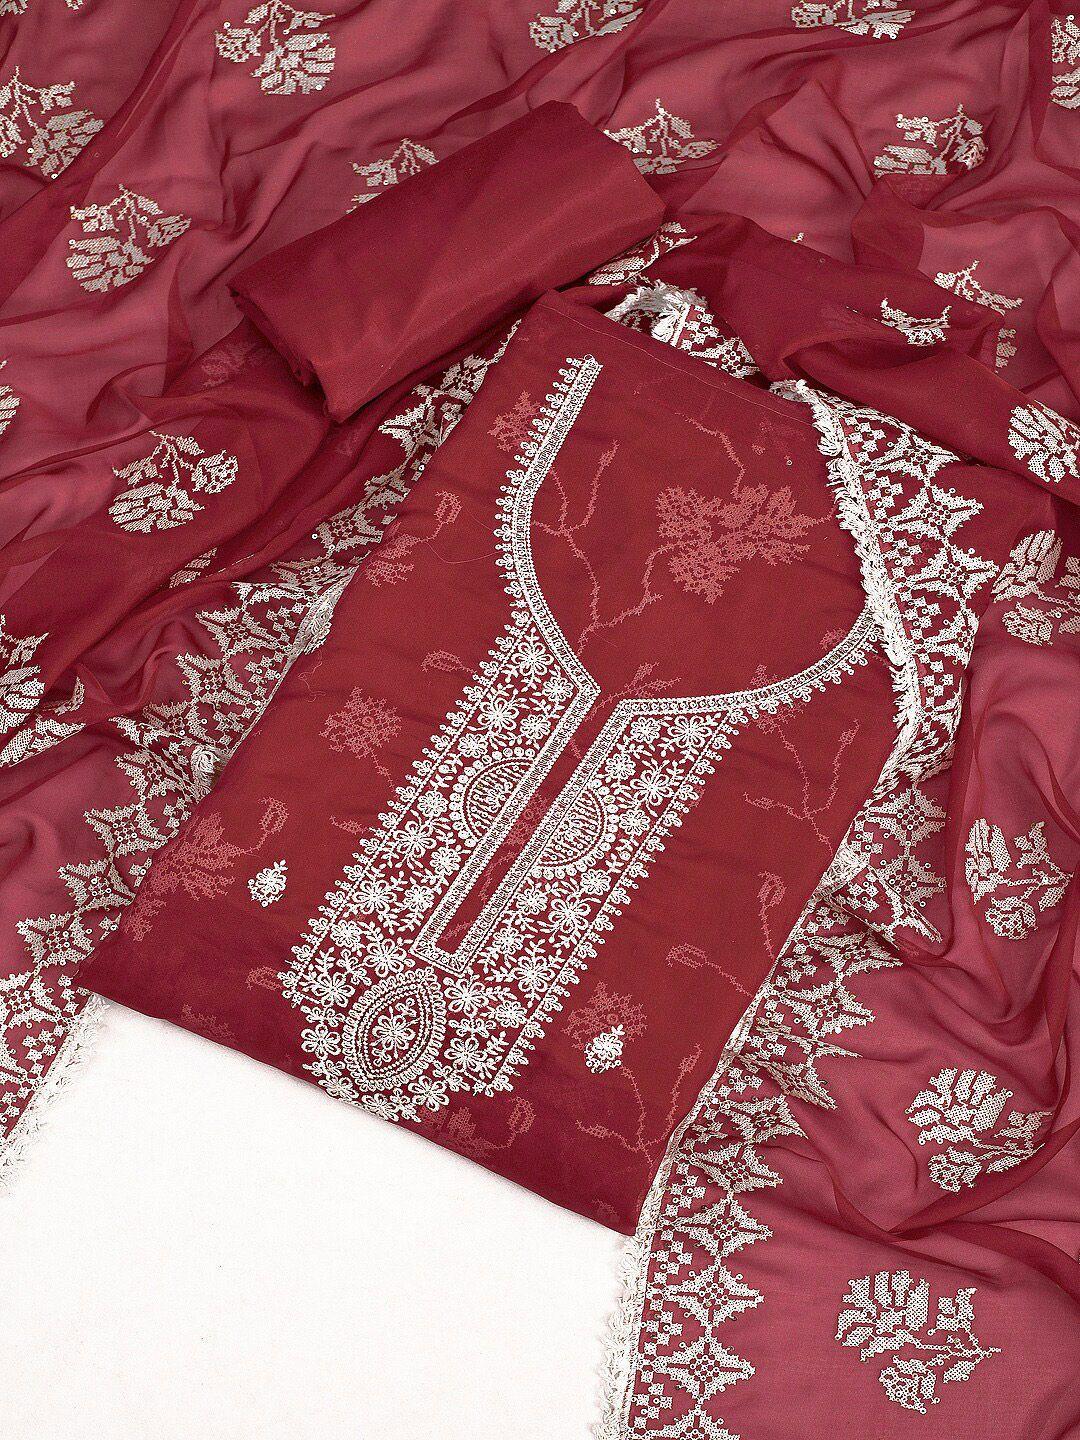 inddus-maroon-&-white-embroidered-organza-unstitched-dress-material